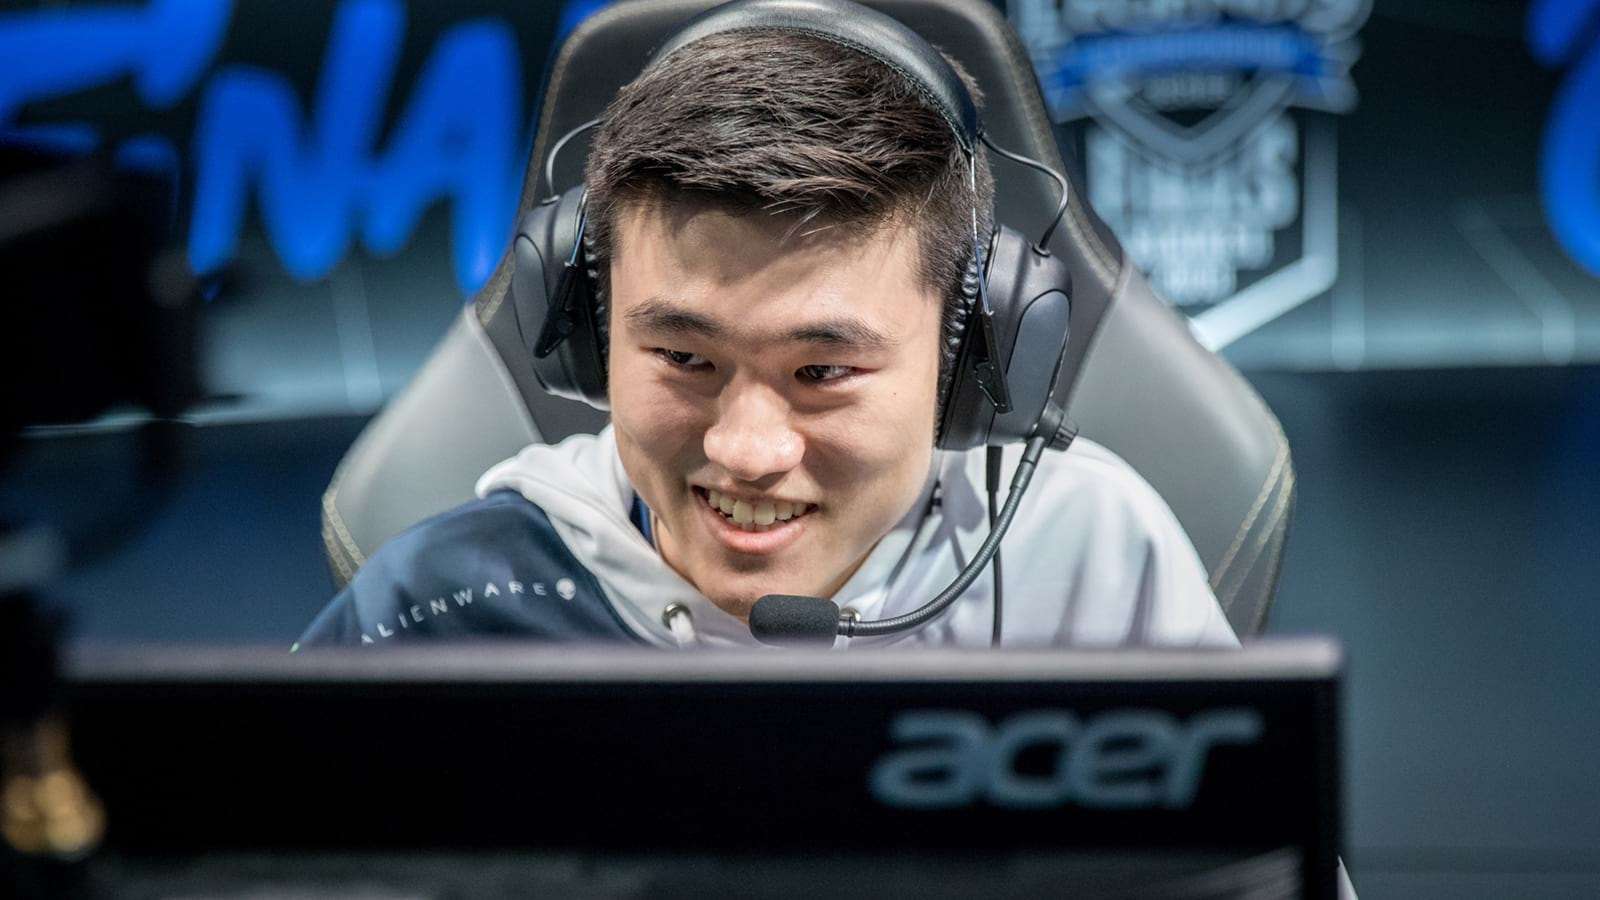 Pobelter in Team Liquid jersey close up on stage at LCS